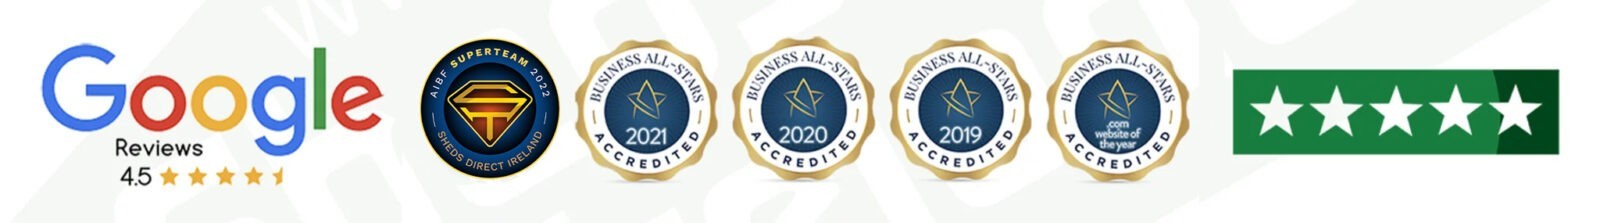 Award banner with All-Business stars badges on it